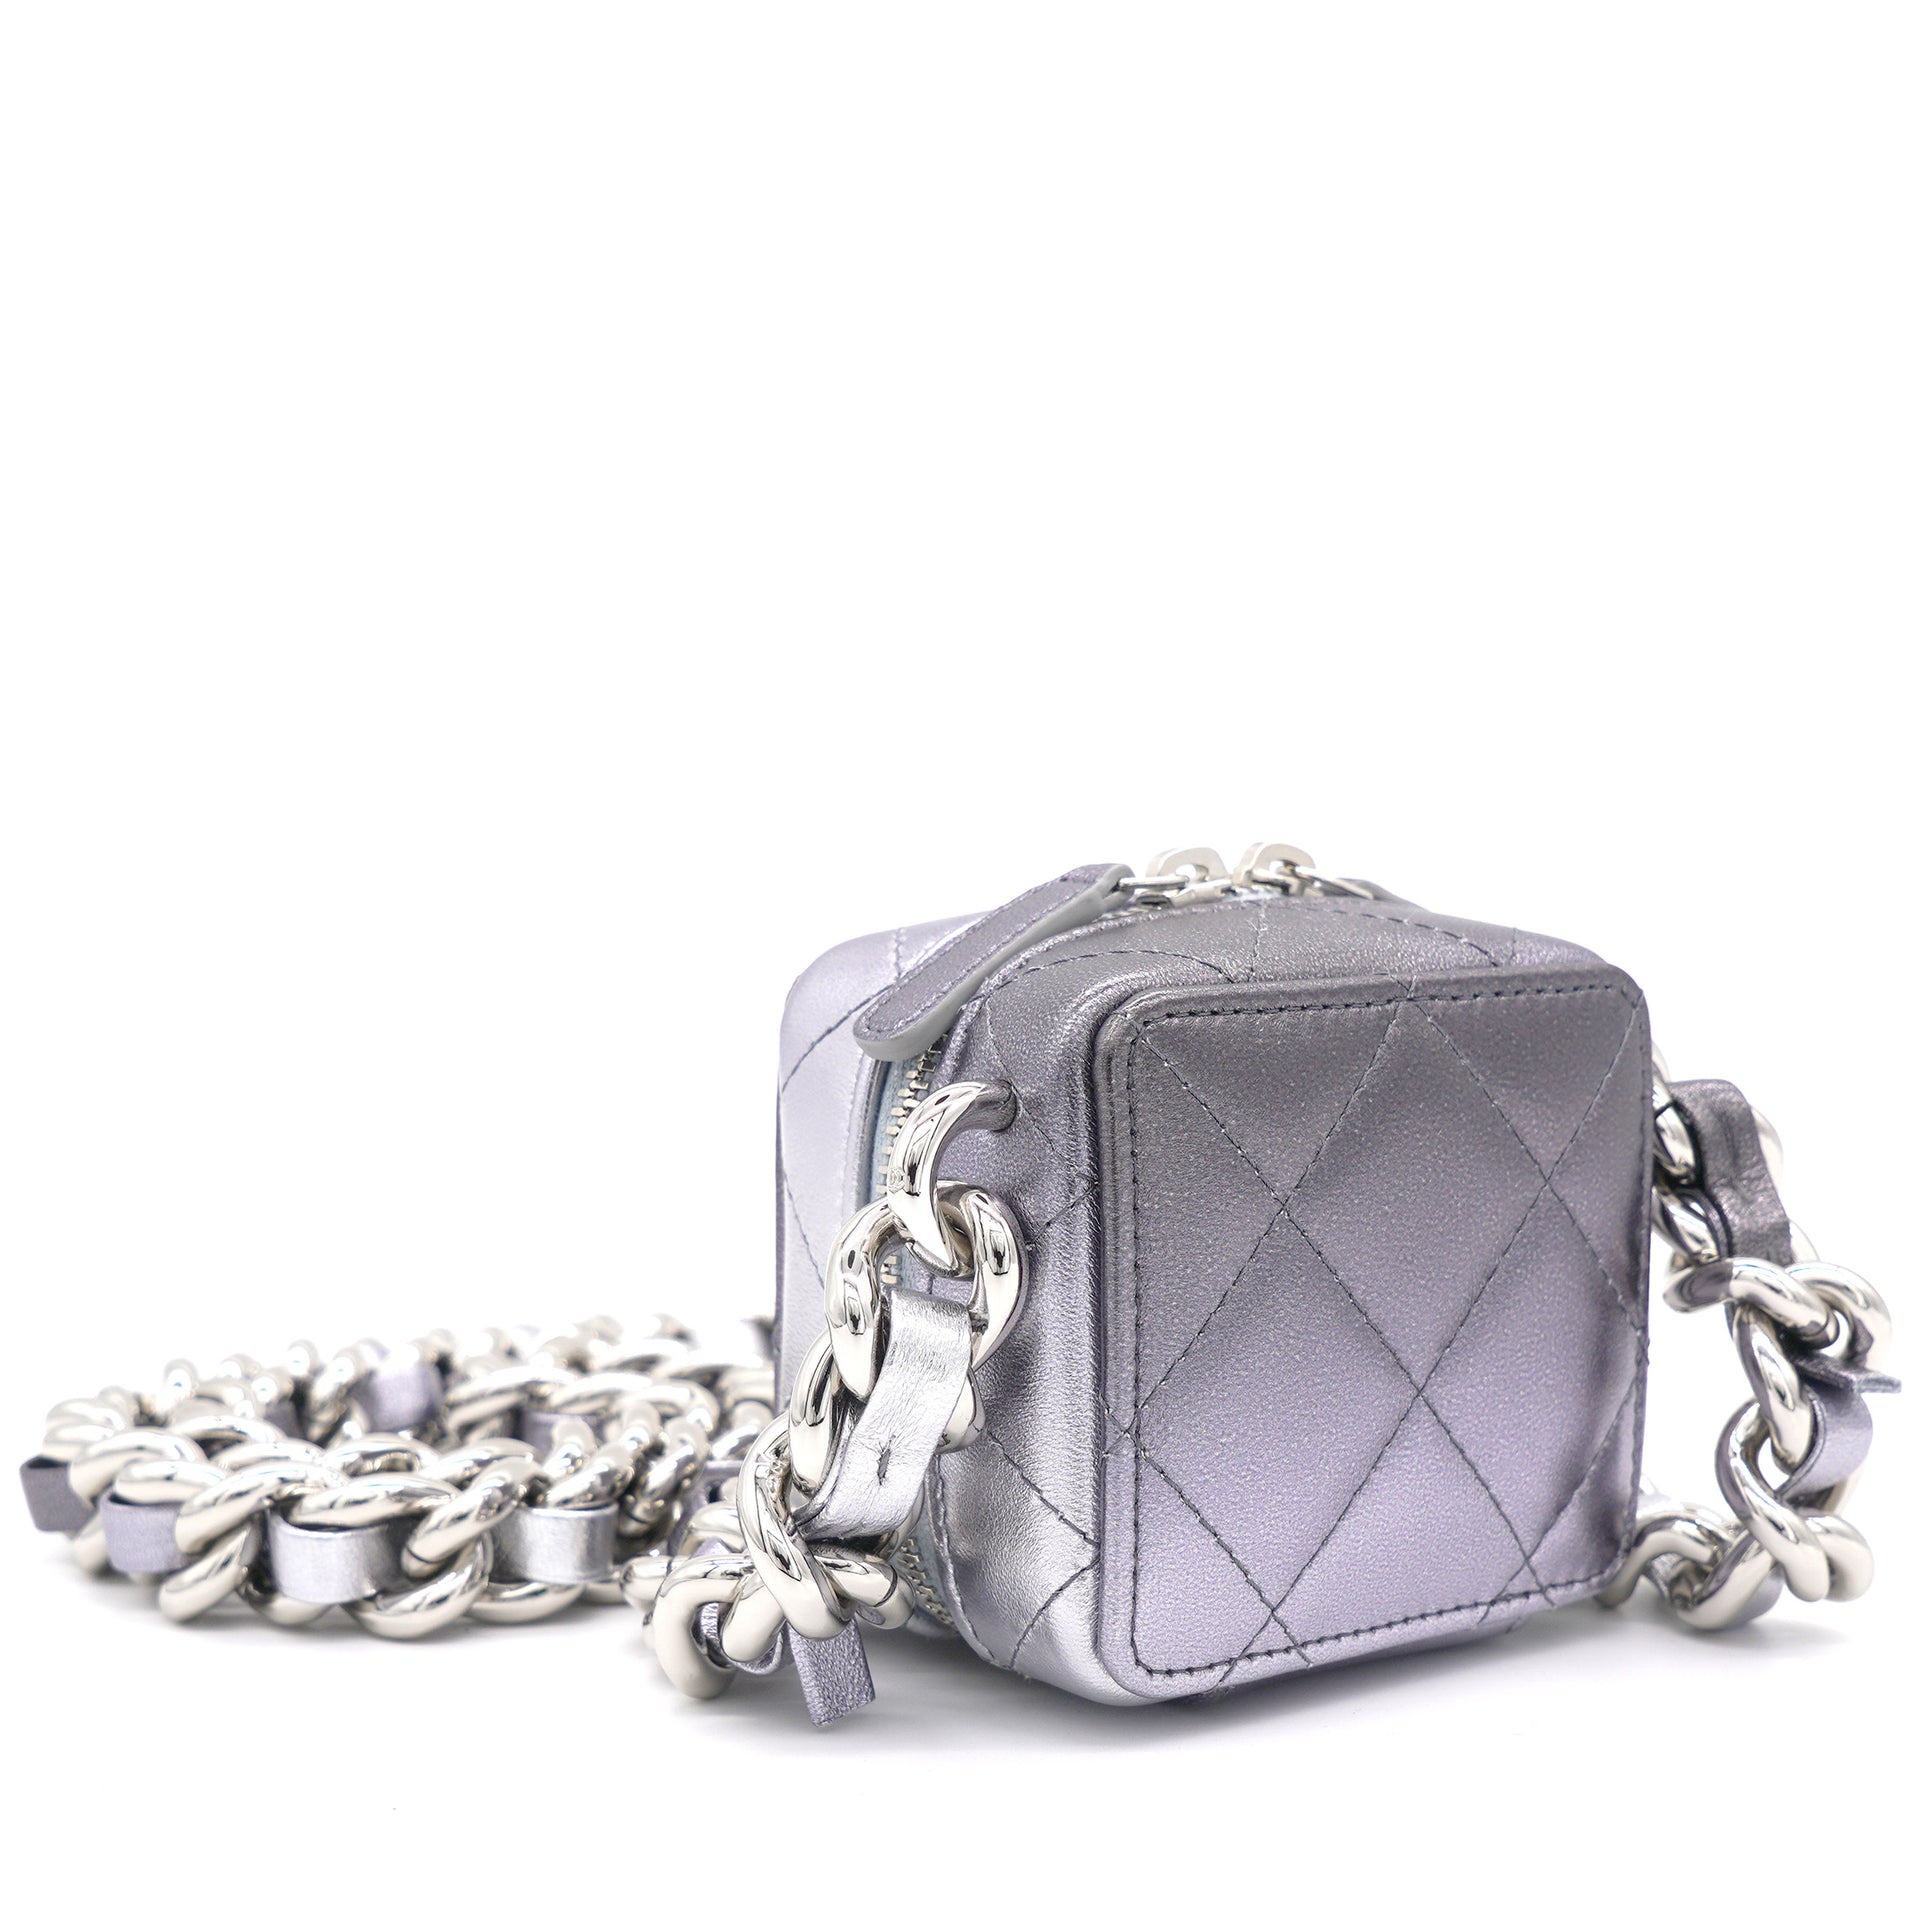 Gradient Metallic Silver and Purple Lambskin Clutch with Chain